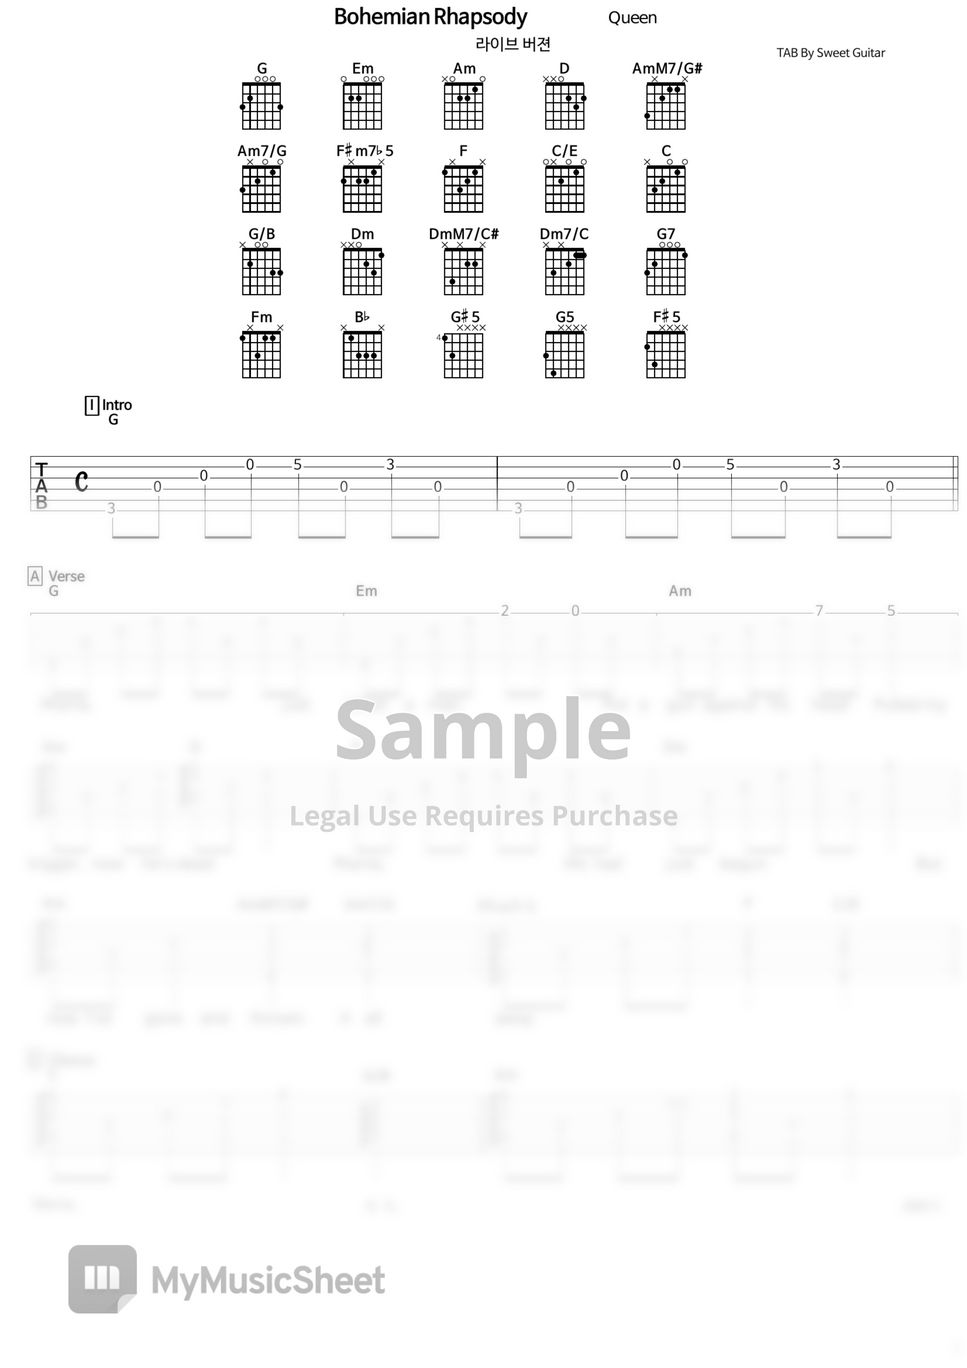 Bohemian Rhapsody Acoustic Guitar TAB (Queen - Live at LIVE AID 버젼 ,1985) 보헤미안랩소디 통기타악보 by sweet guitar